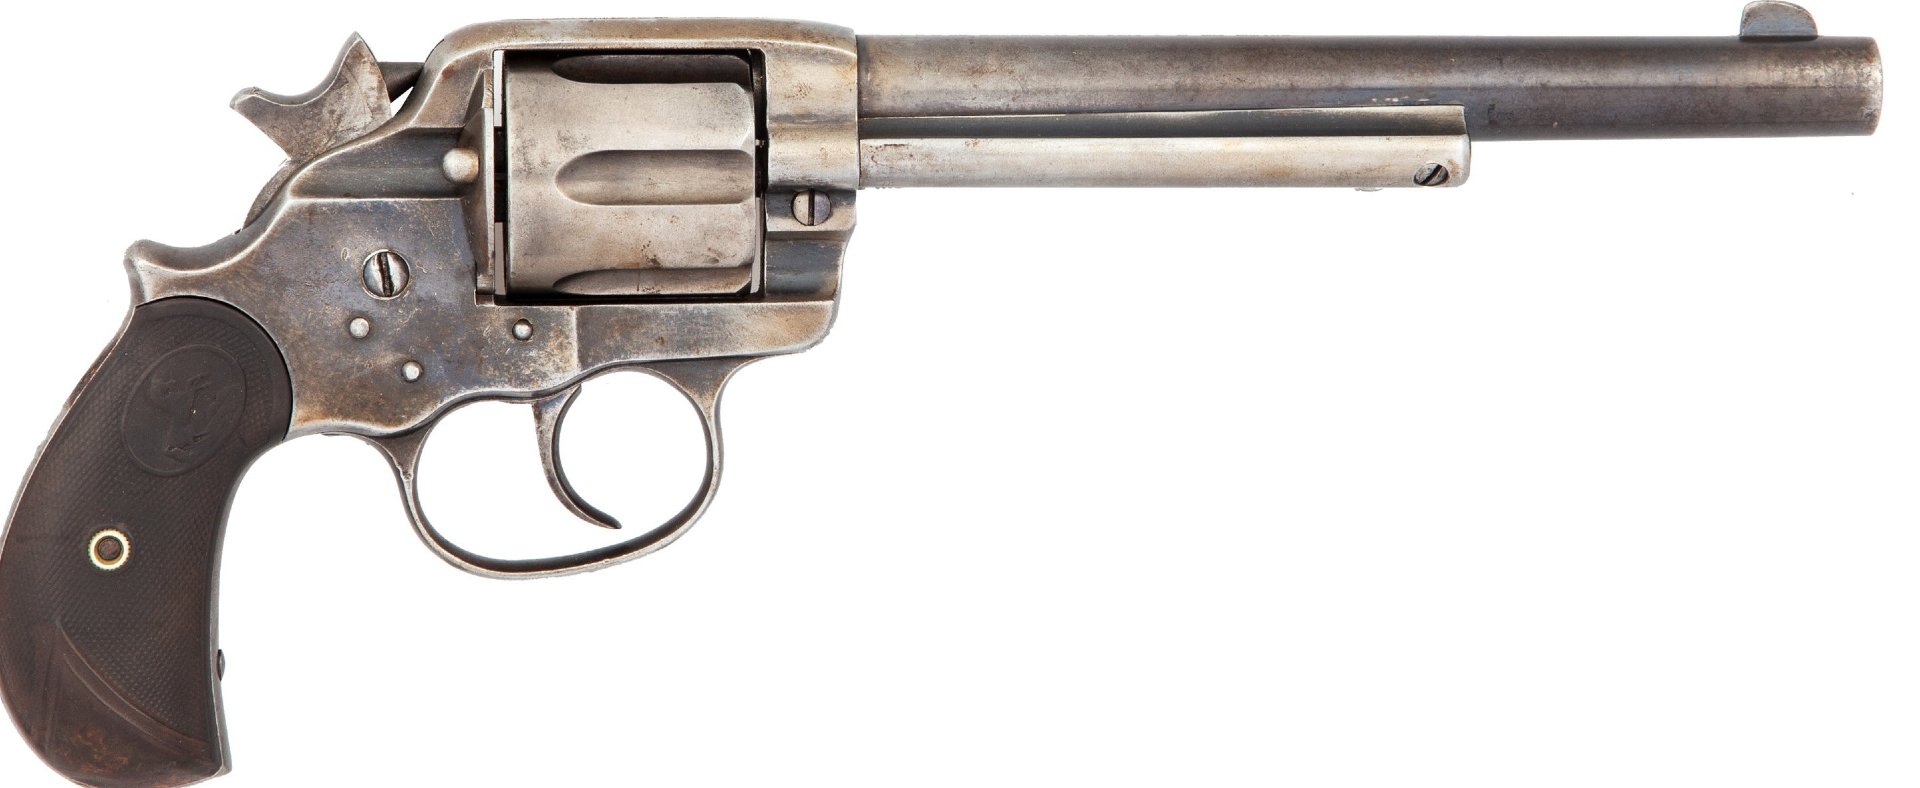 The Model 1878 Colt Was a Double Action That Saw Limited Action in the Wild  West